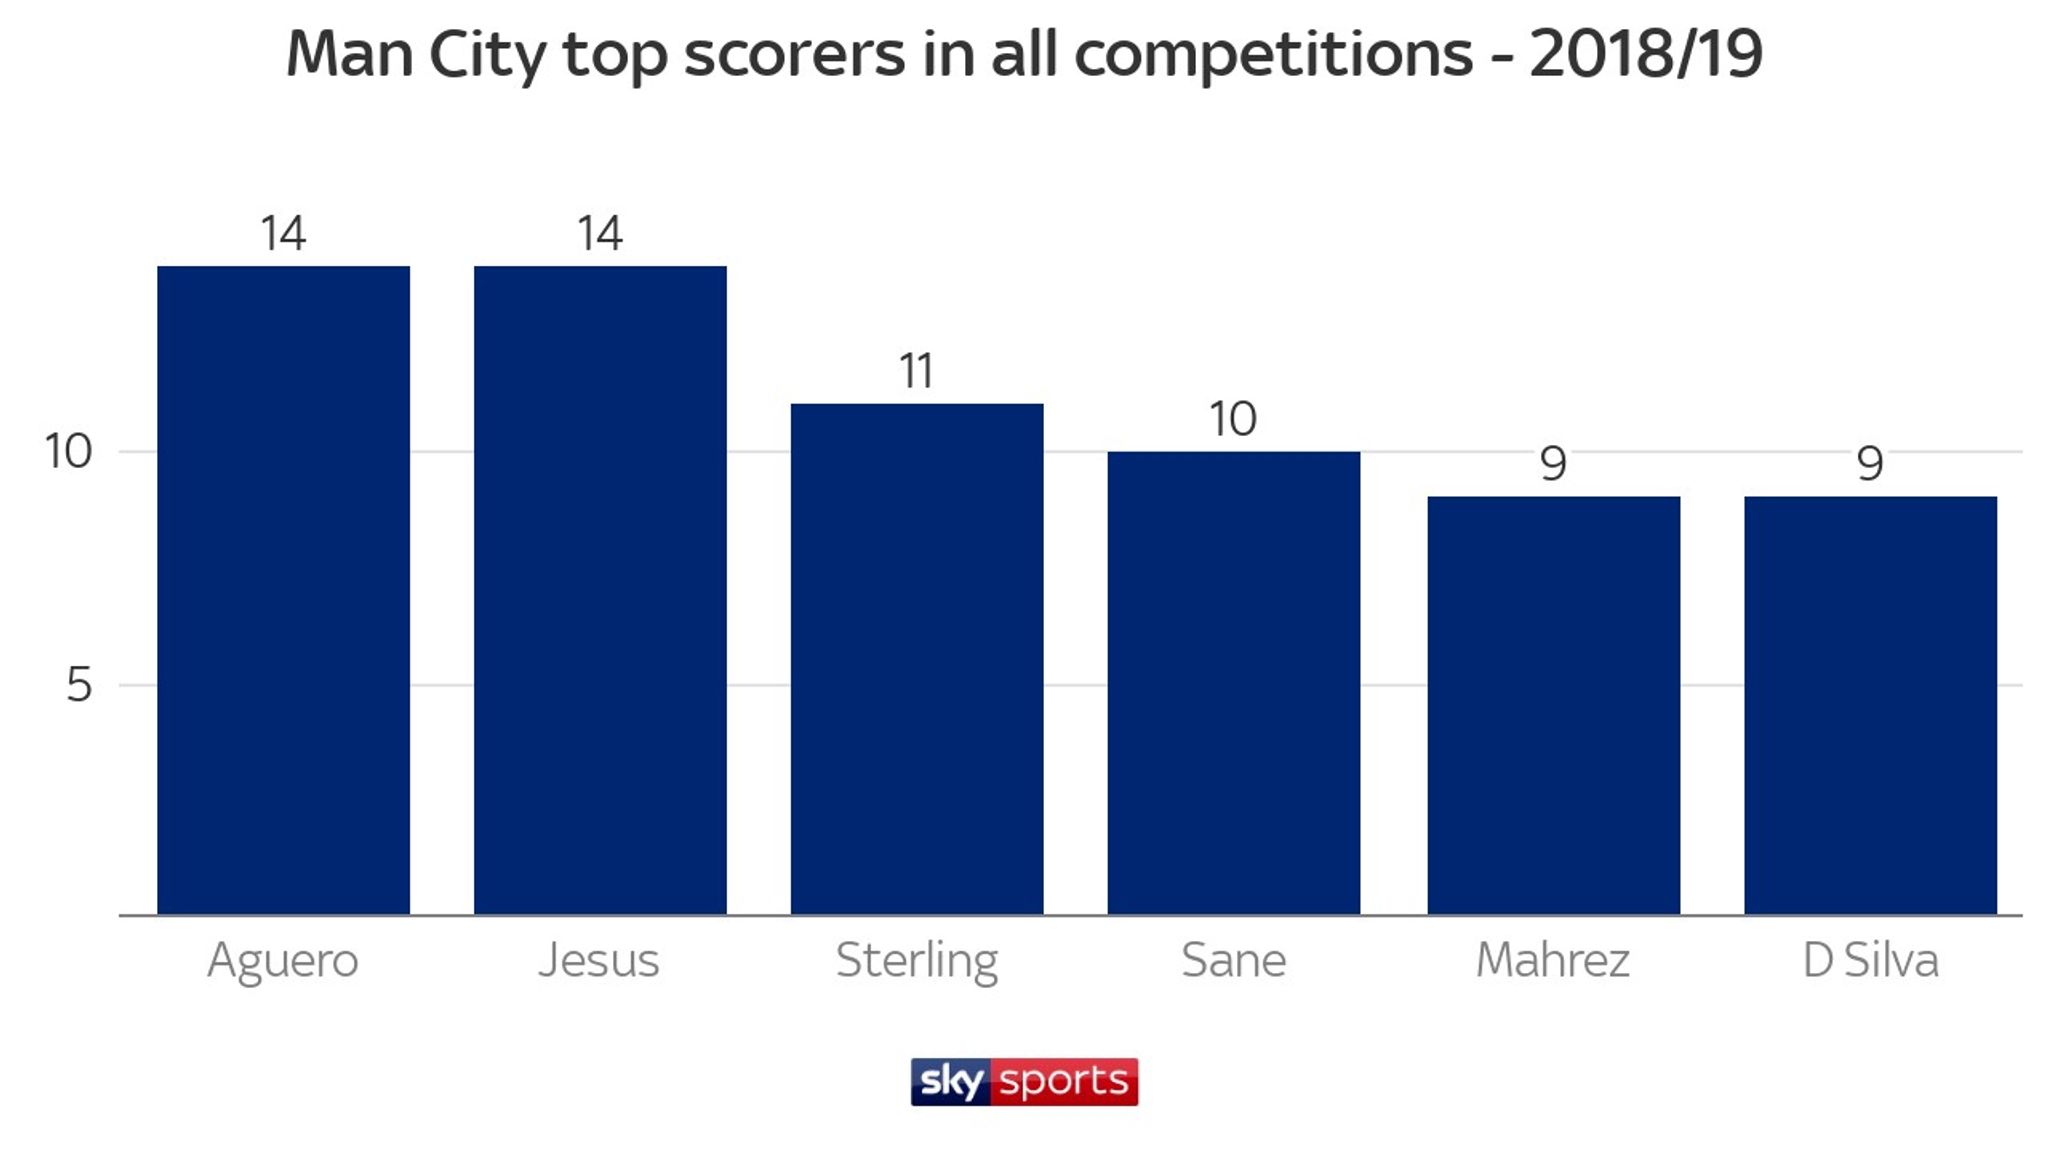 Manchester City are the goal kings with 99 goals in all competitions